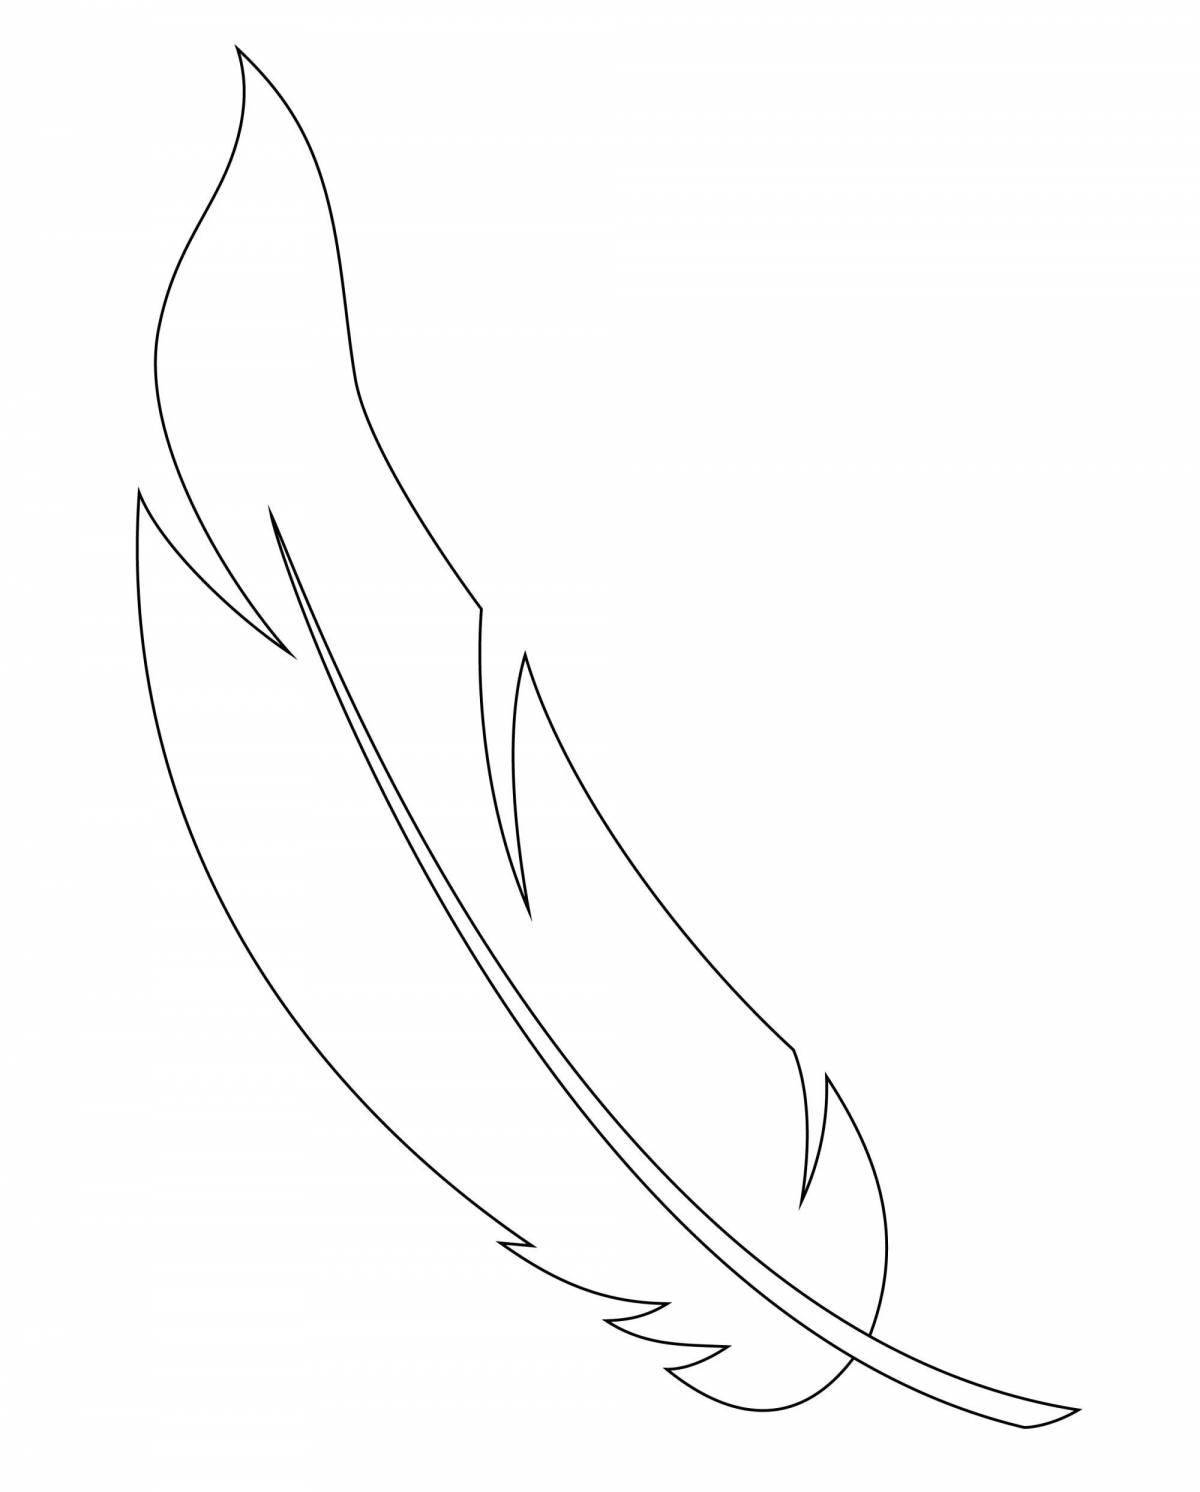 Coloring page playful pattern with feathers